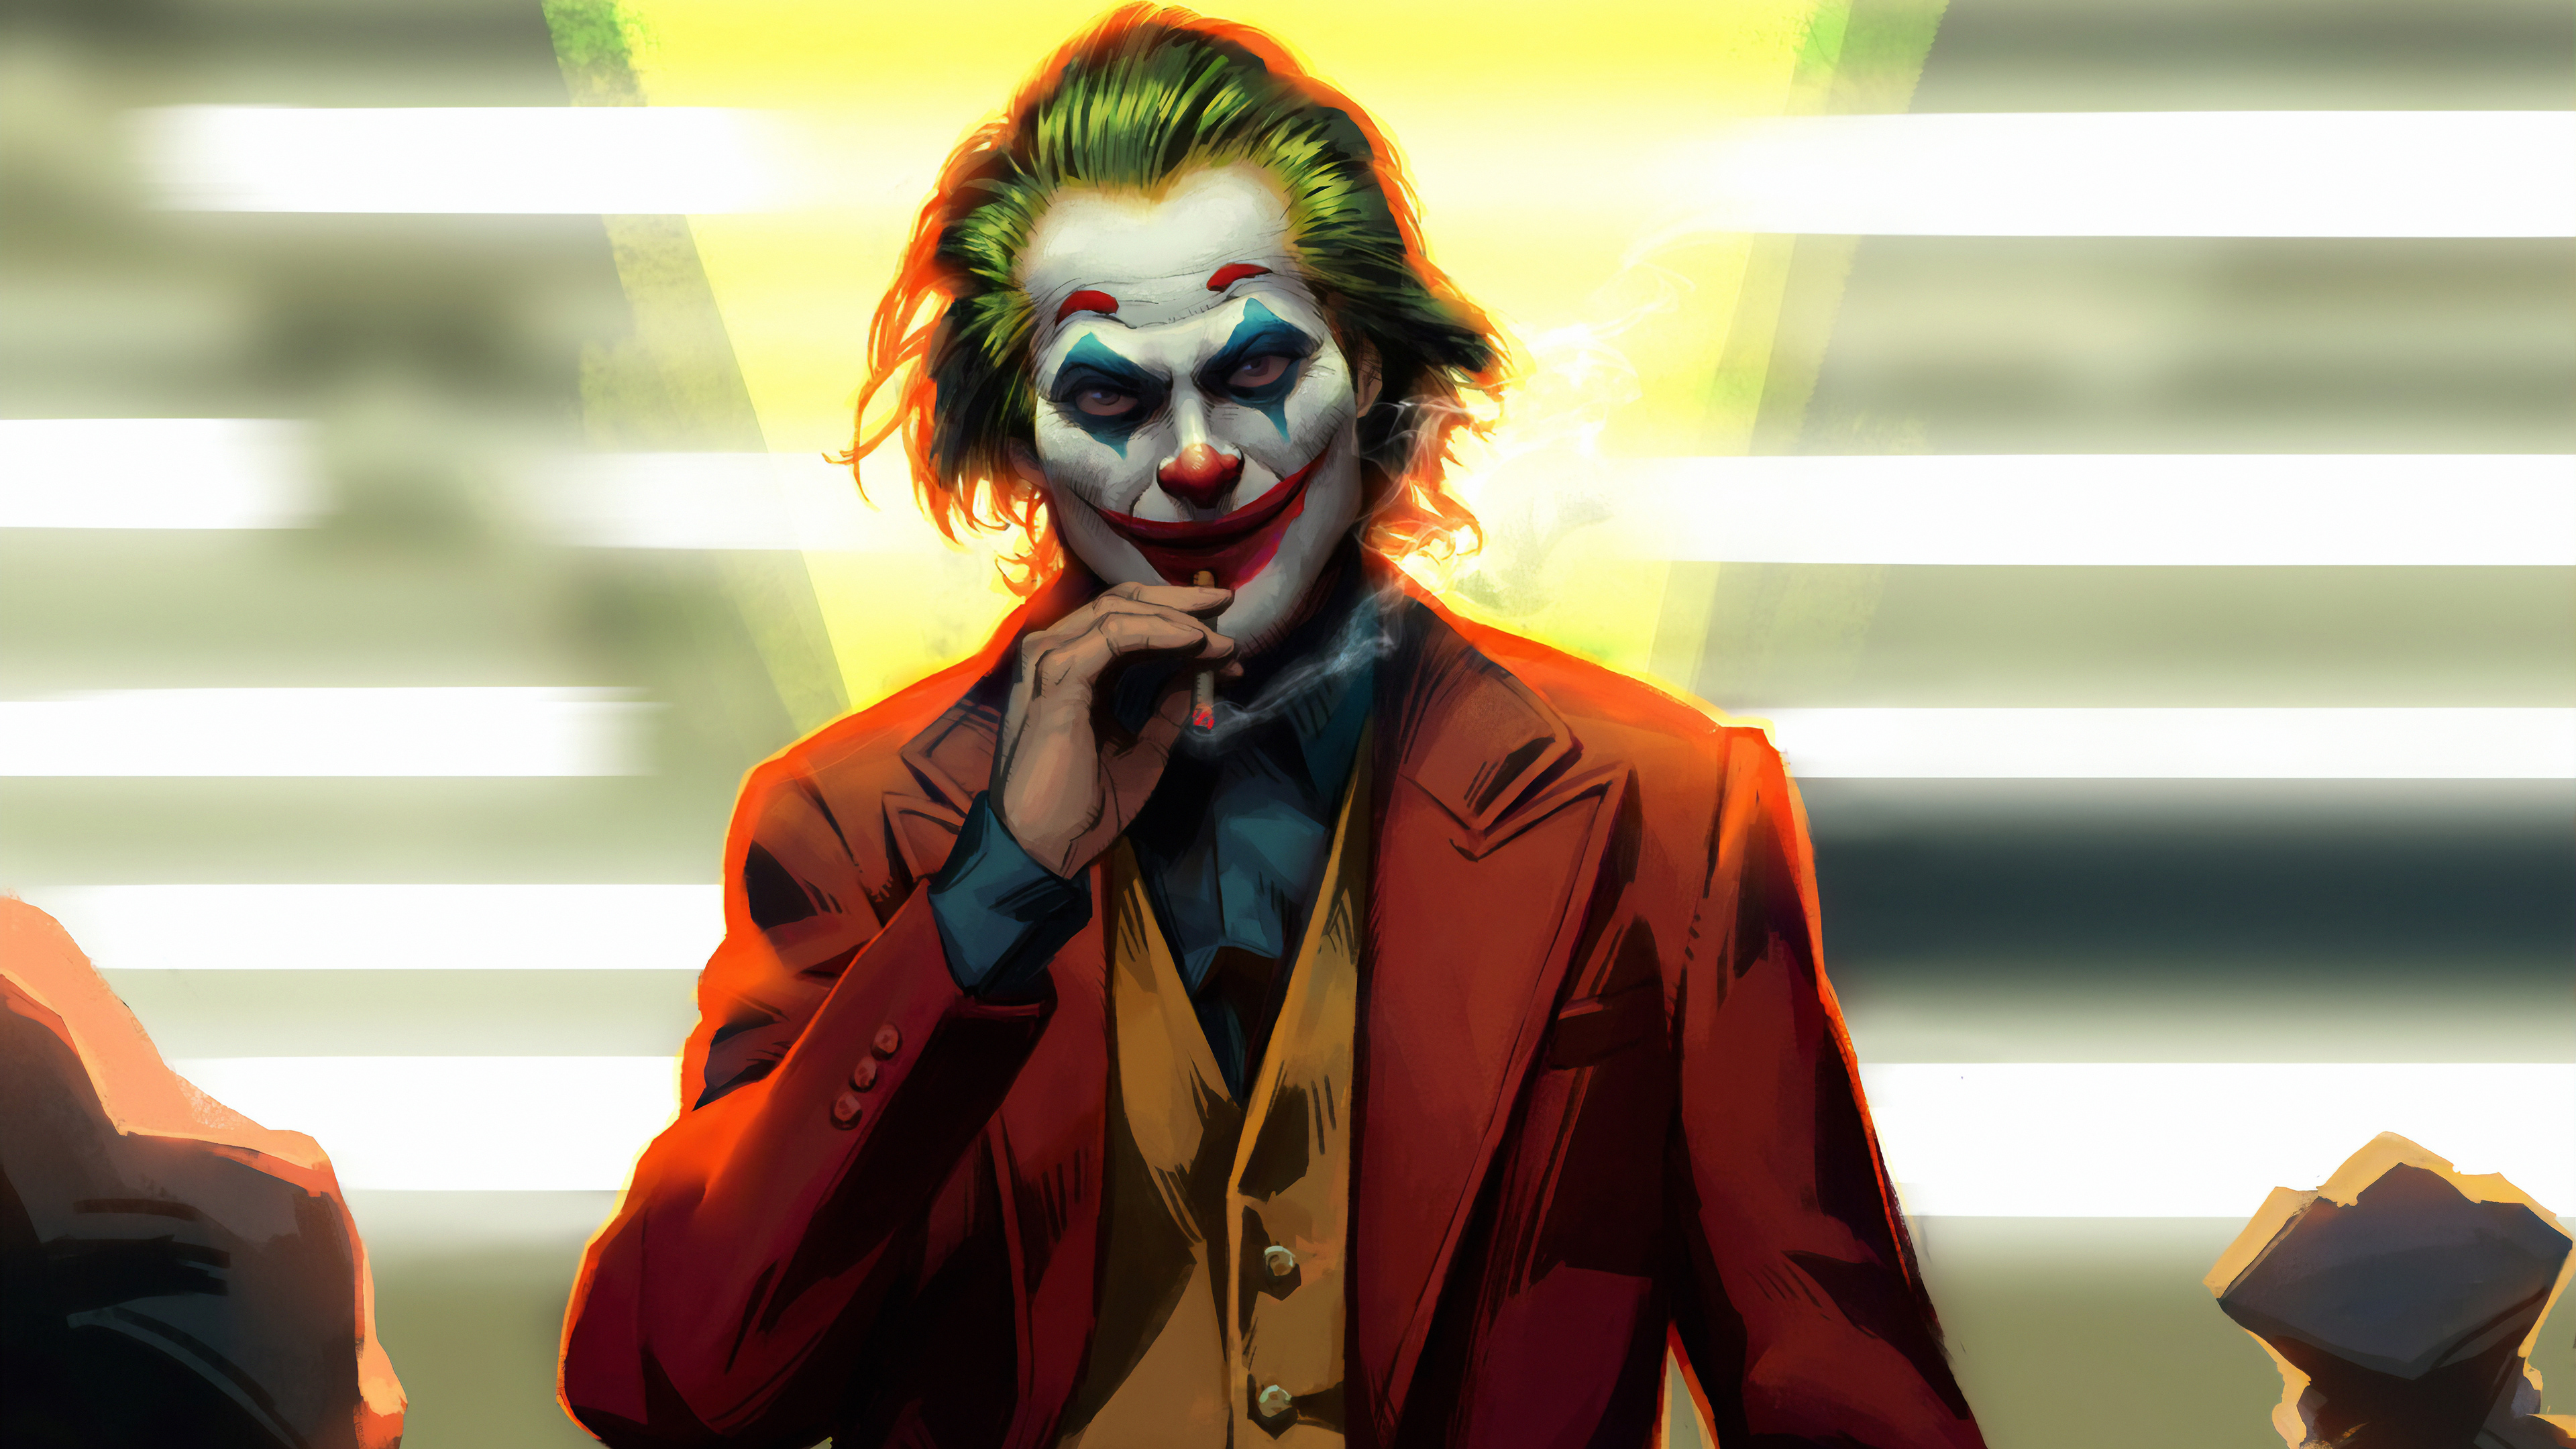 Premium AI Image  The joker wallpapers hd wallpapers and backgrounds image